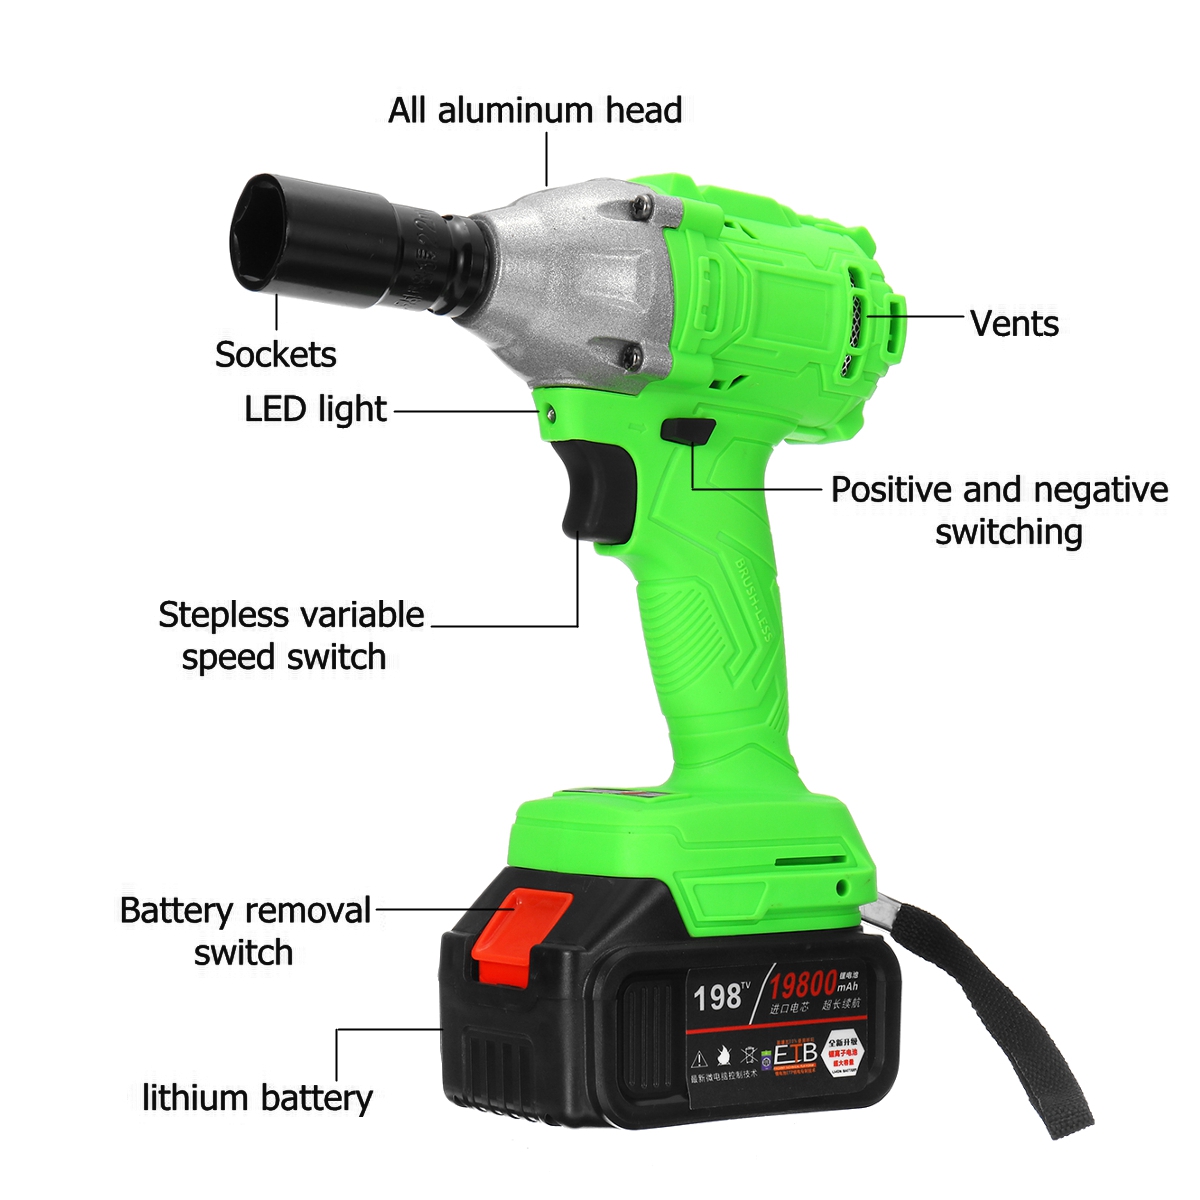 520Nm-198TV-19800mAh-Electric-Cordless-Impact-Wrench-Driver-Tool-12quot-Ratchet-Drive-Sockets-1618429-8